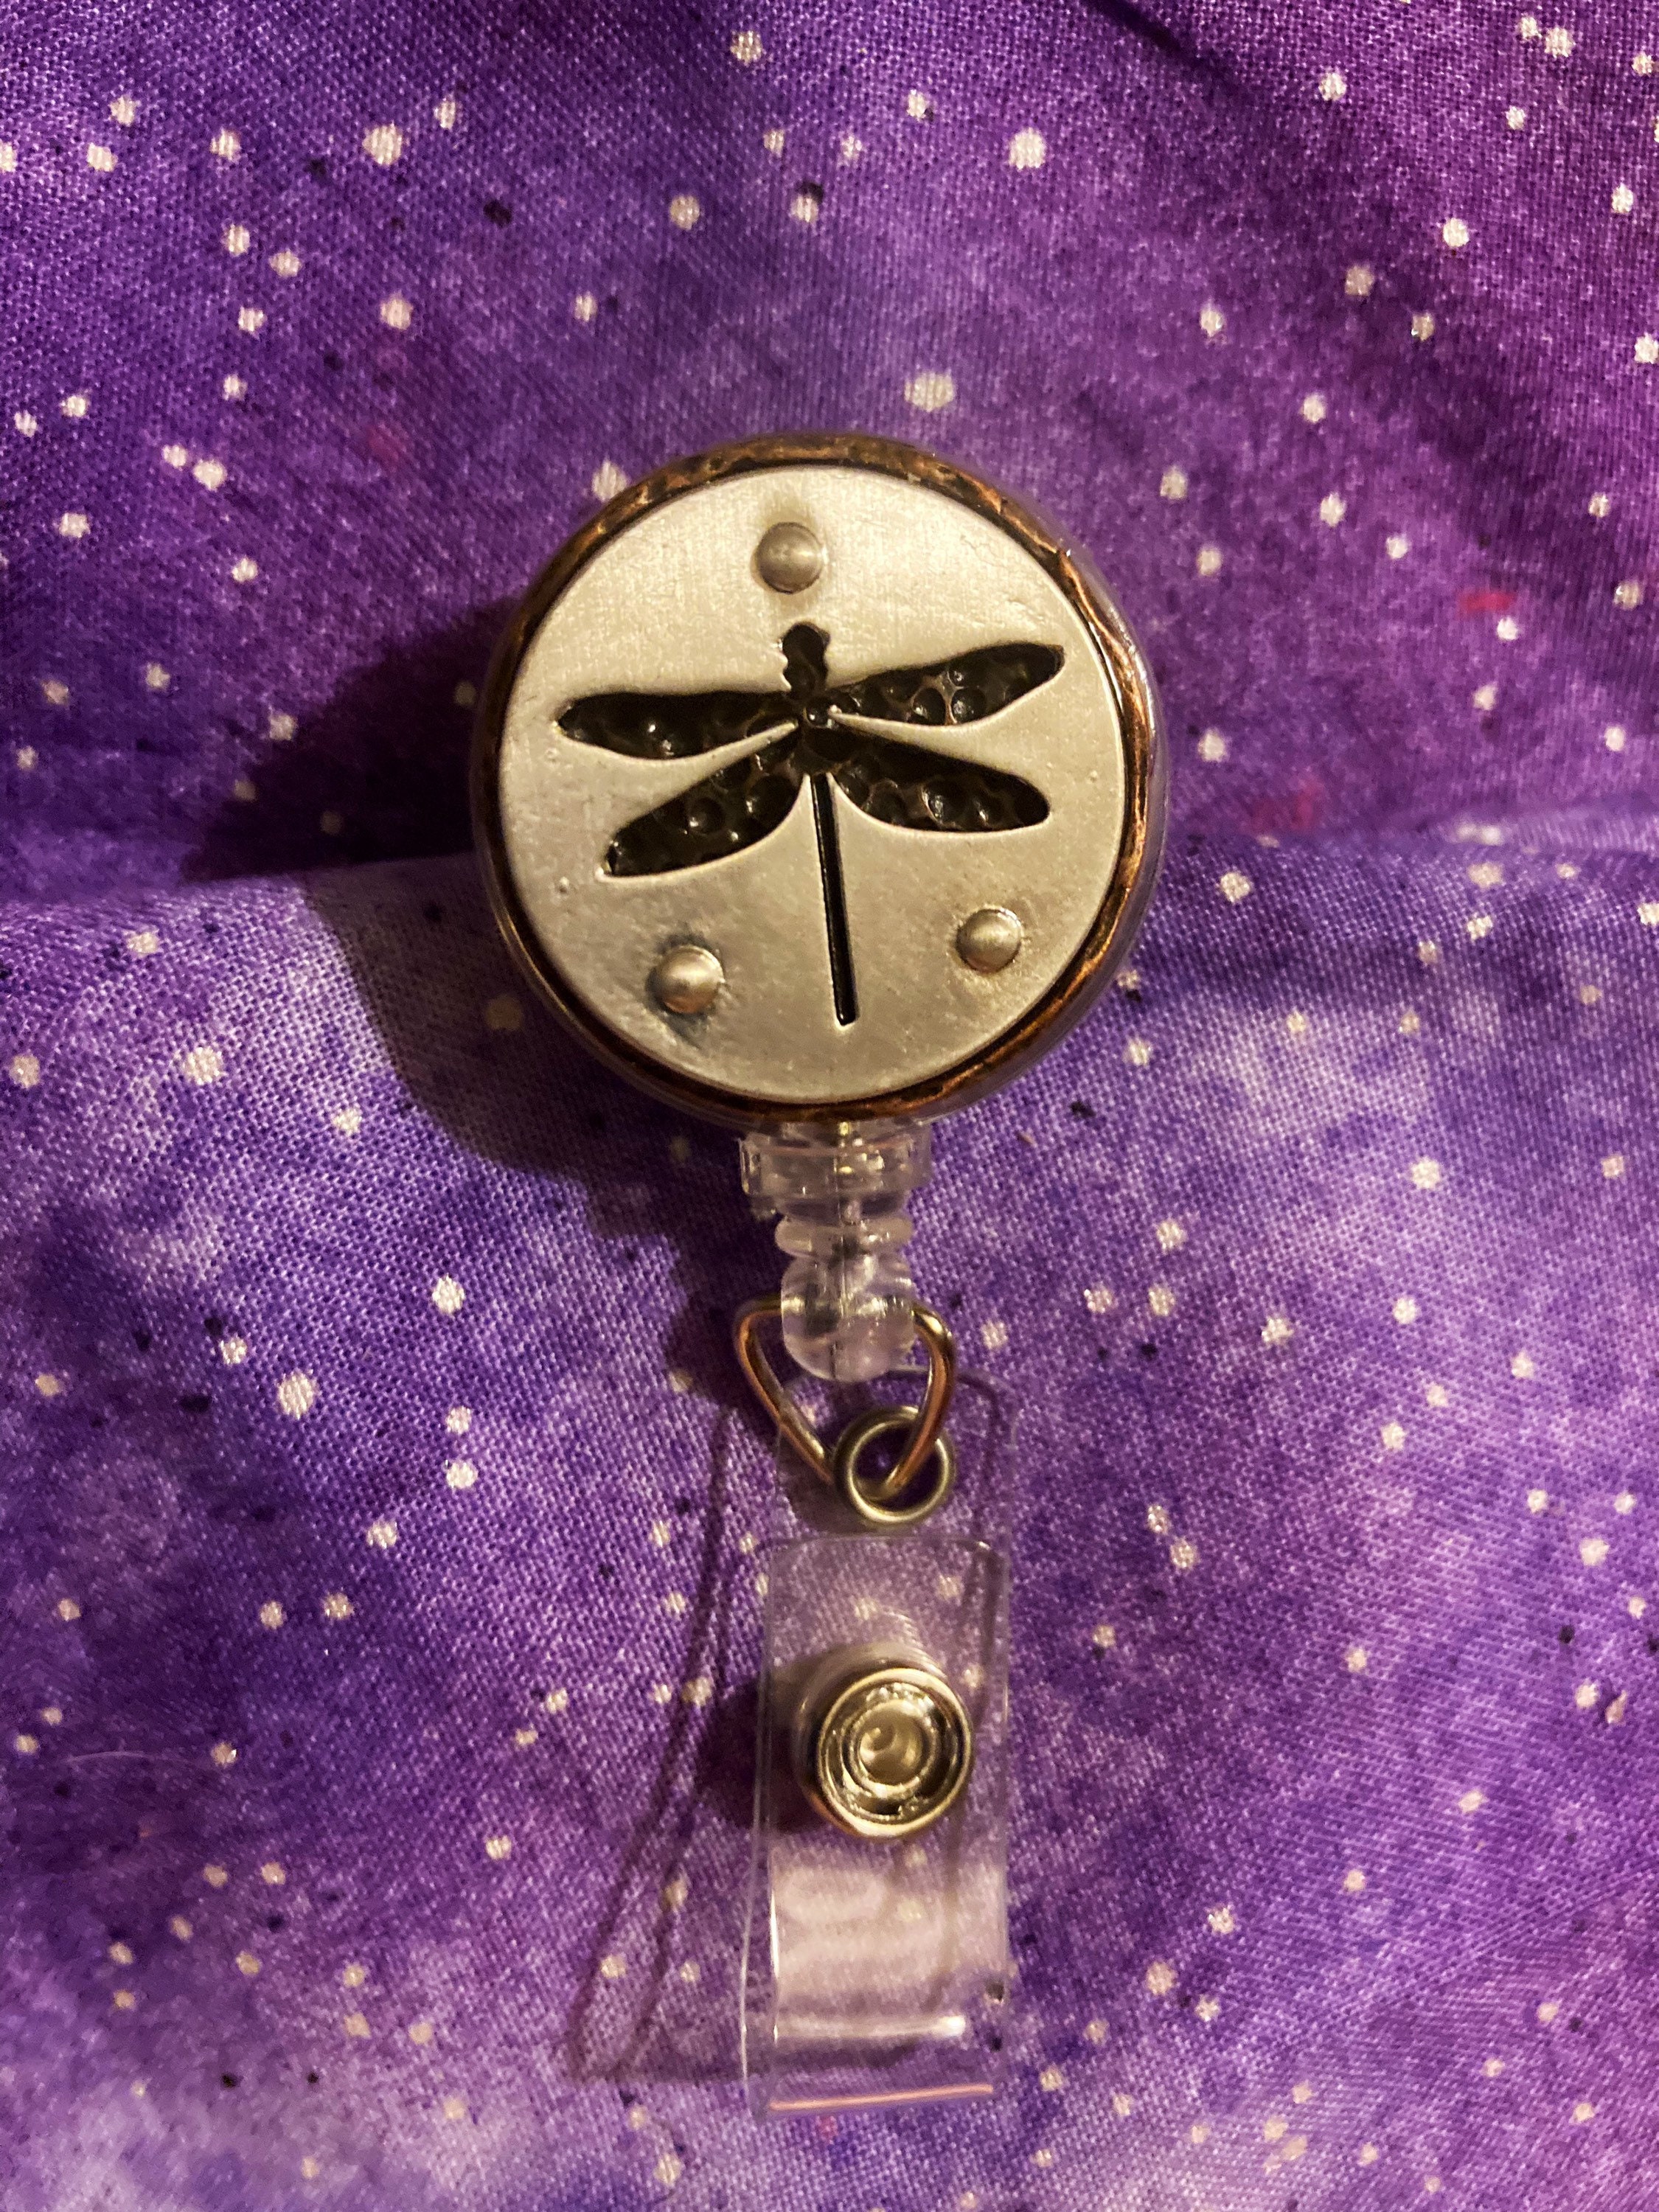 Dragonfly Badge Reel, Retractable ID Name Badge Holder Reel, Badge Clip Work Jewelry, Doctor Nurse Teacher Gift, Ready to Ship